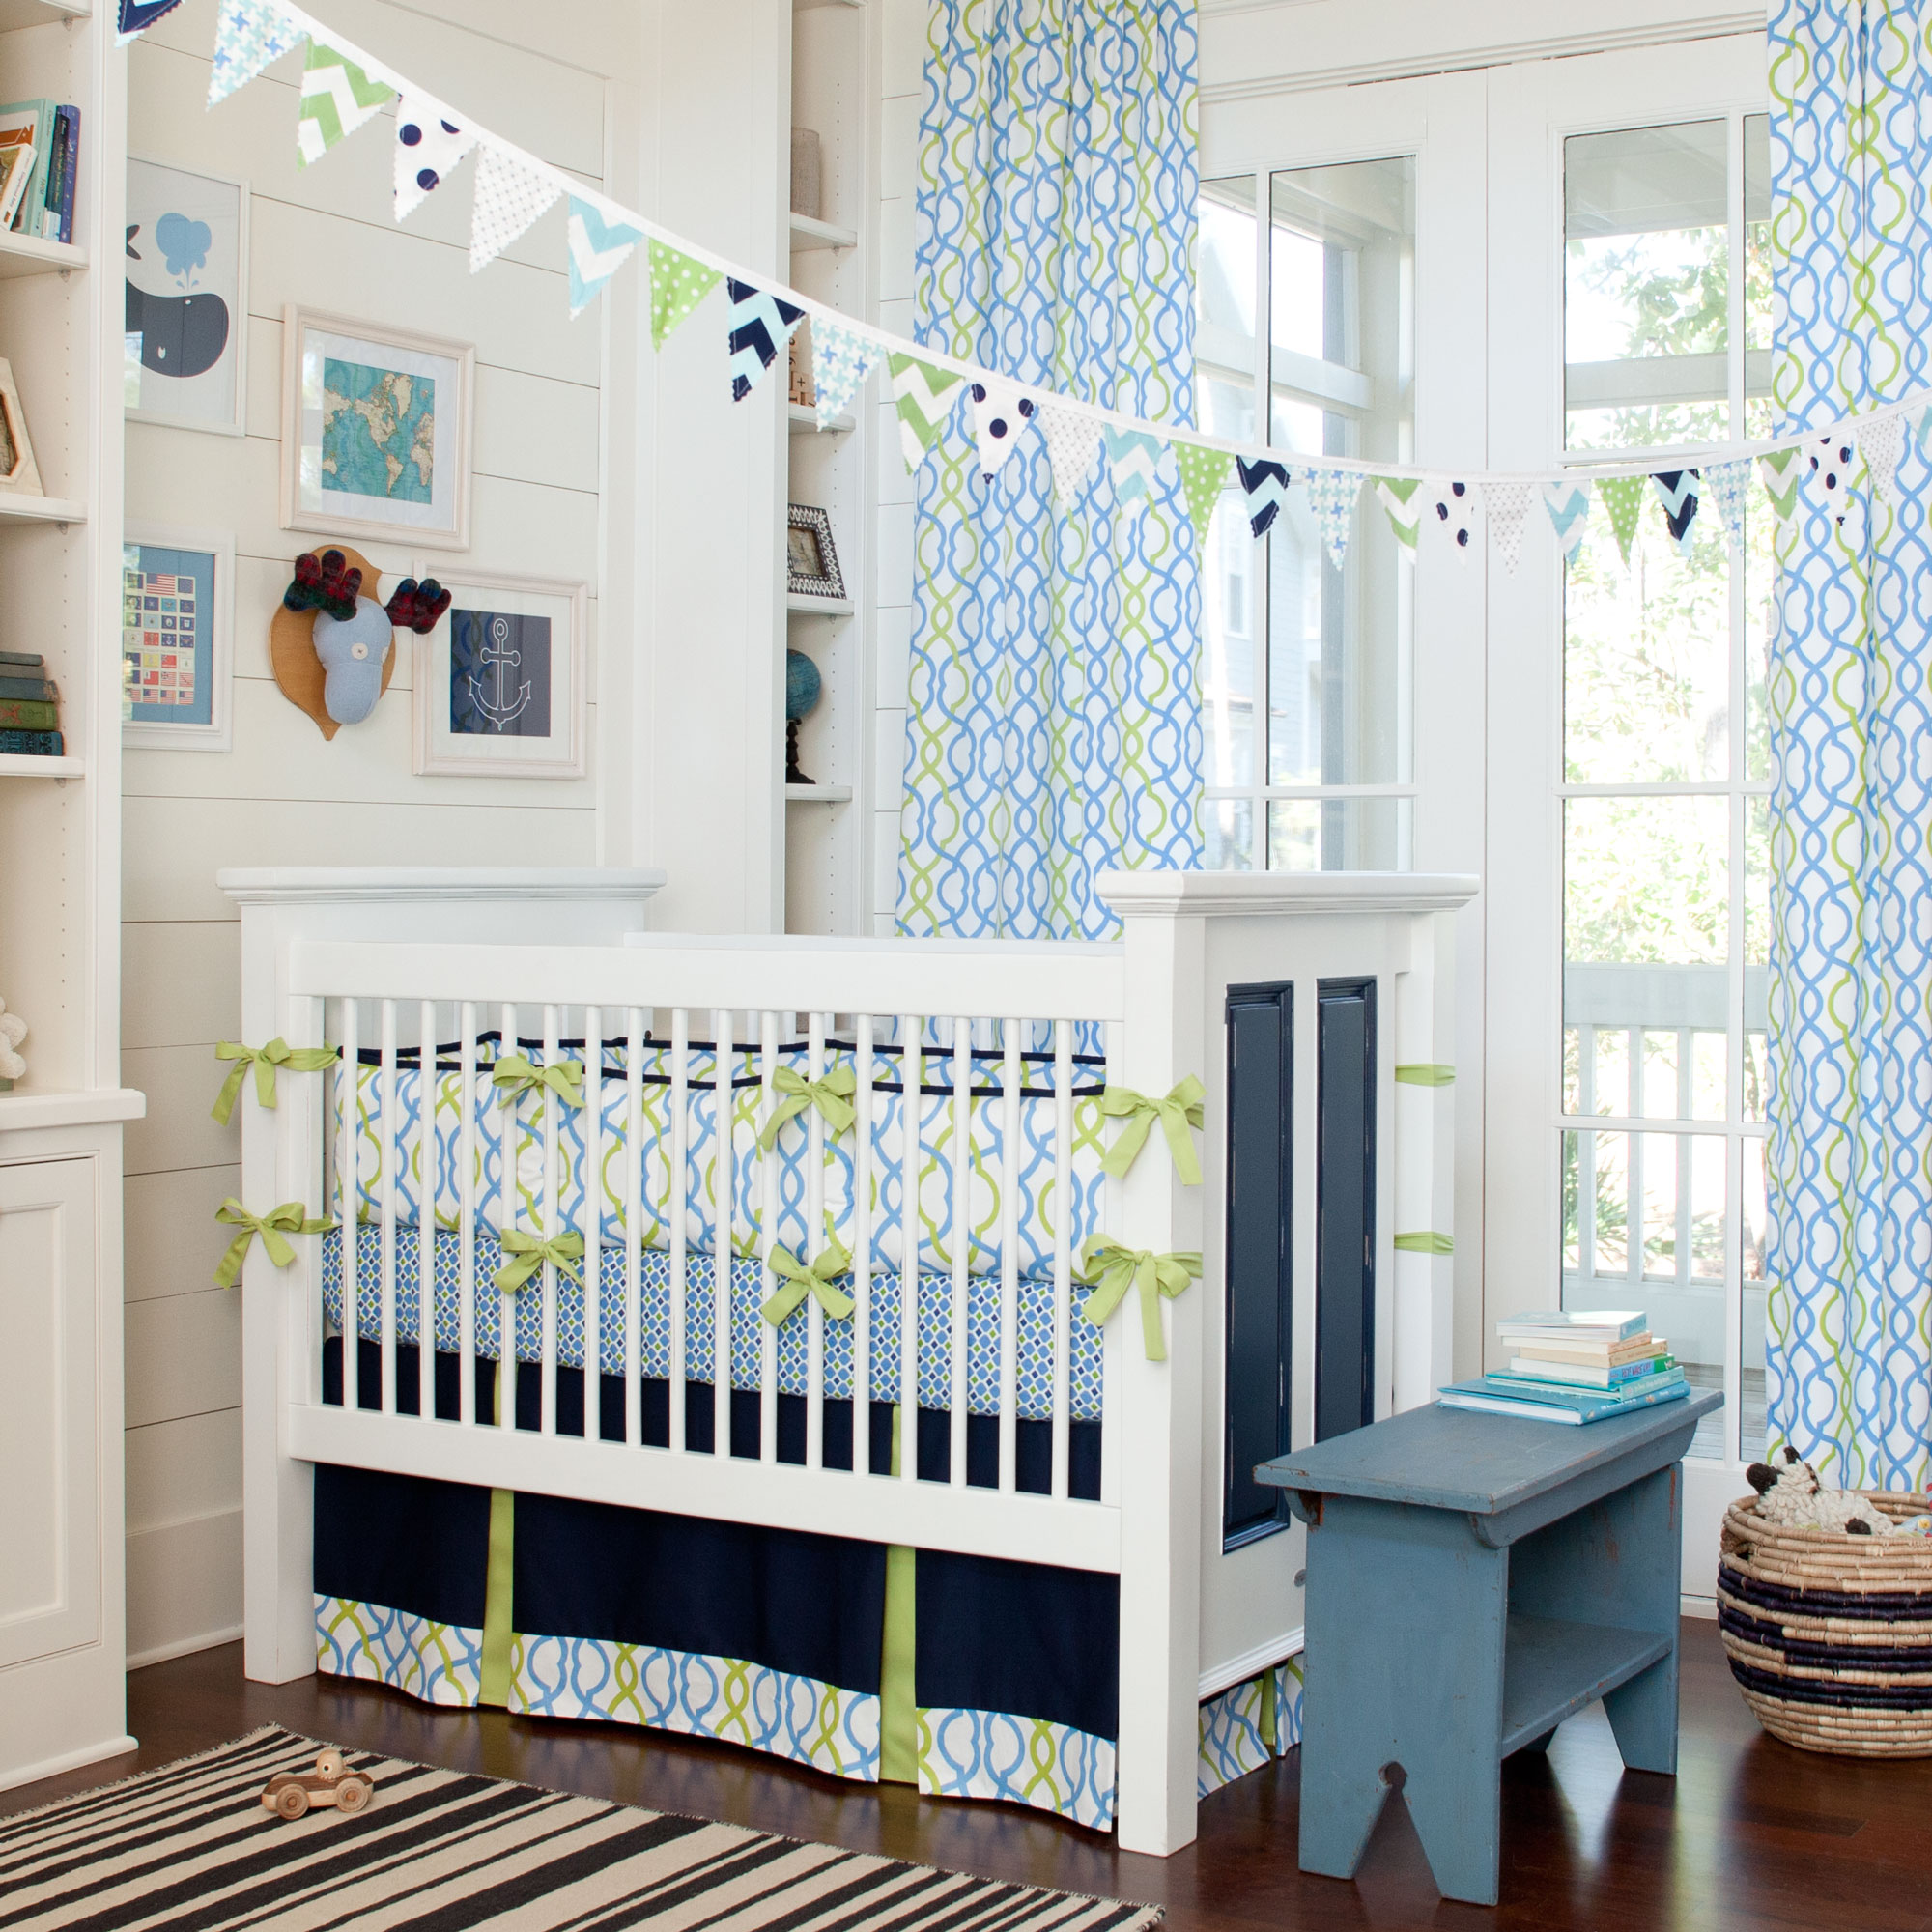 Blue Themed With Trendy Blue Themed Nursery Idea With Baby Boy Crib Bedding Decorated With Patterned Banners And Curtain Kids Room Enchanting Baby Boy Crib Bedding Applied In Colorful Baby Room